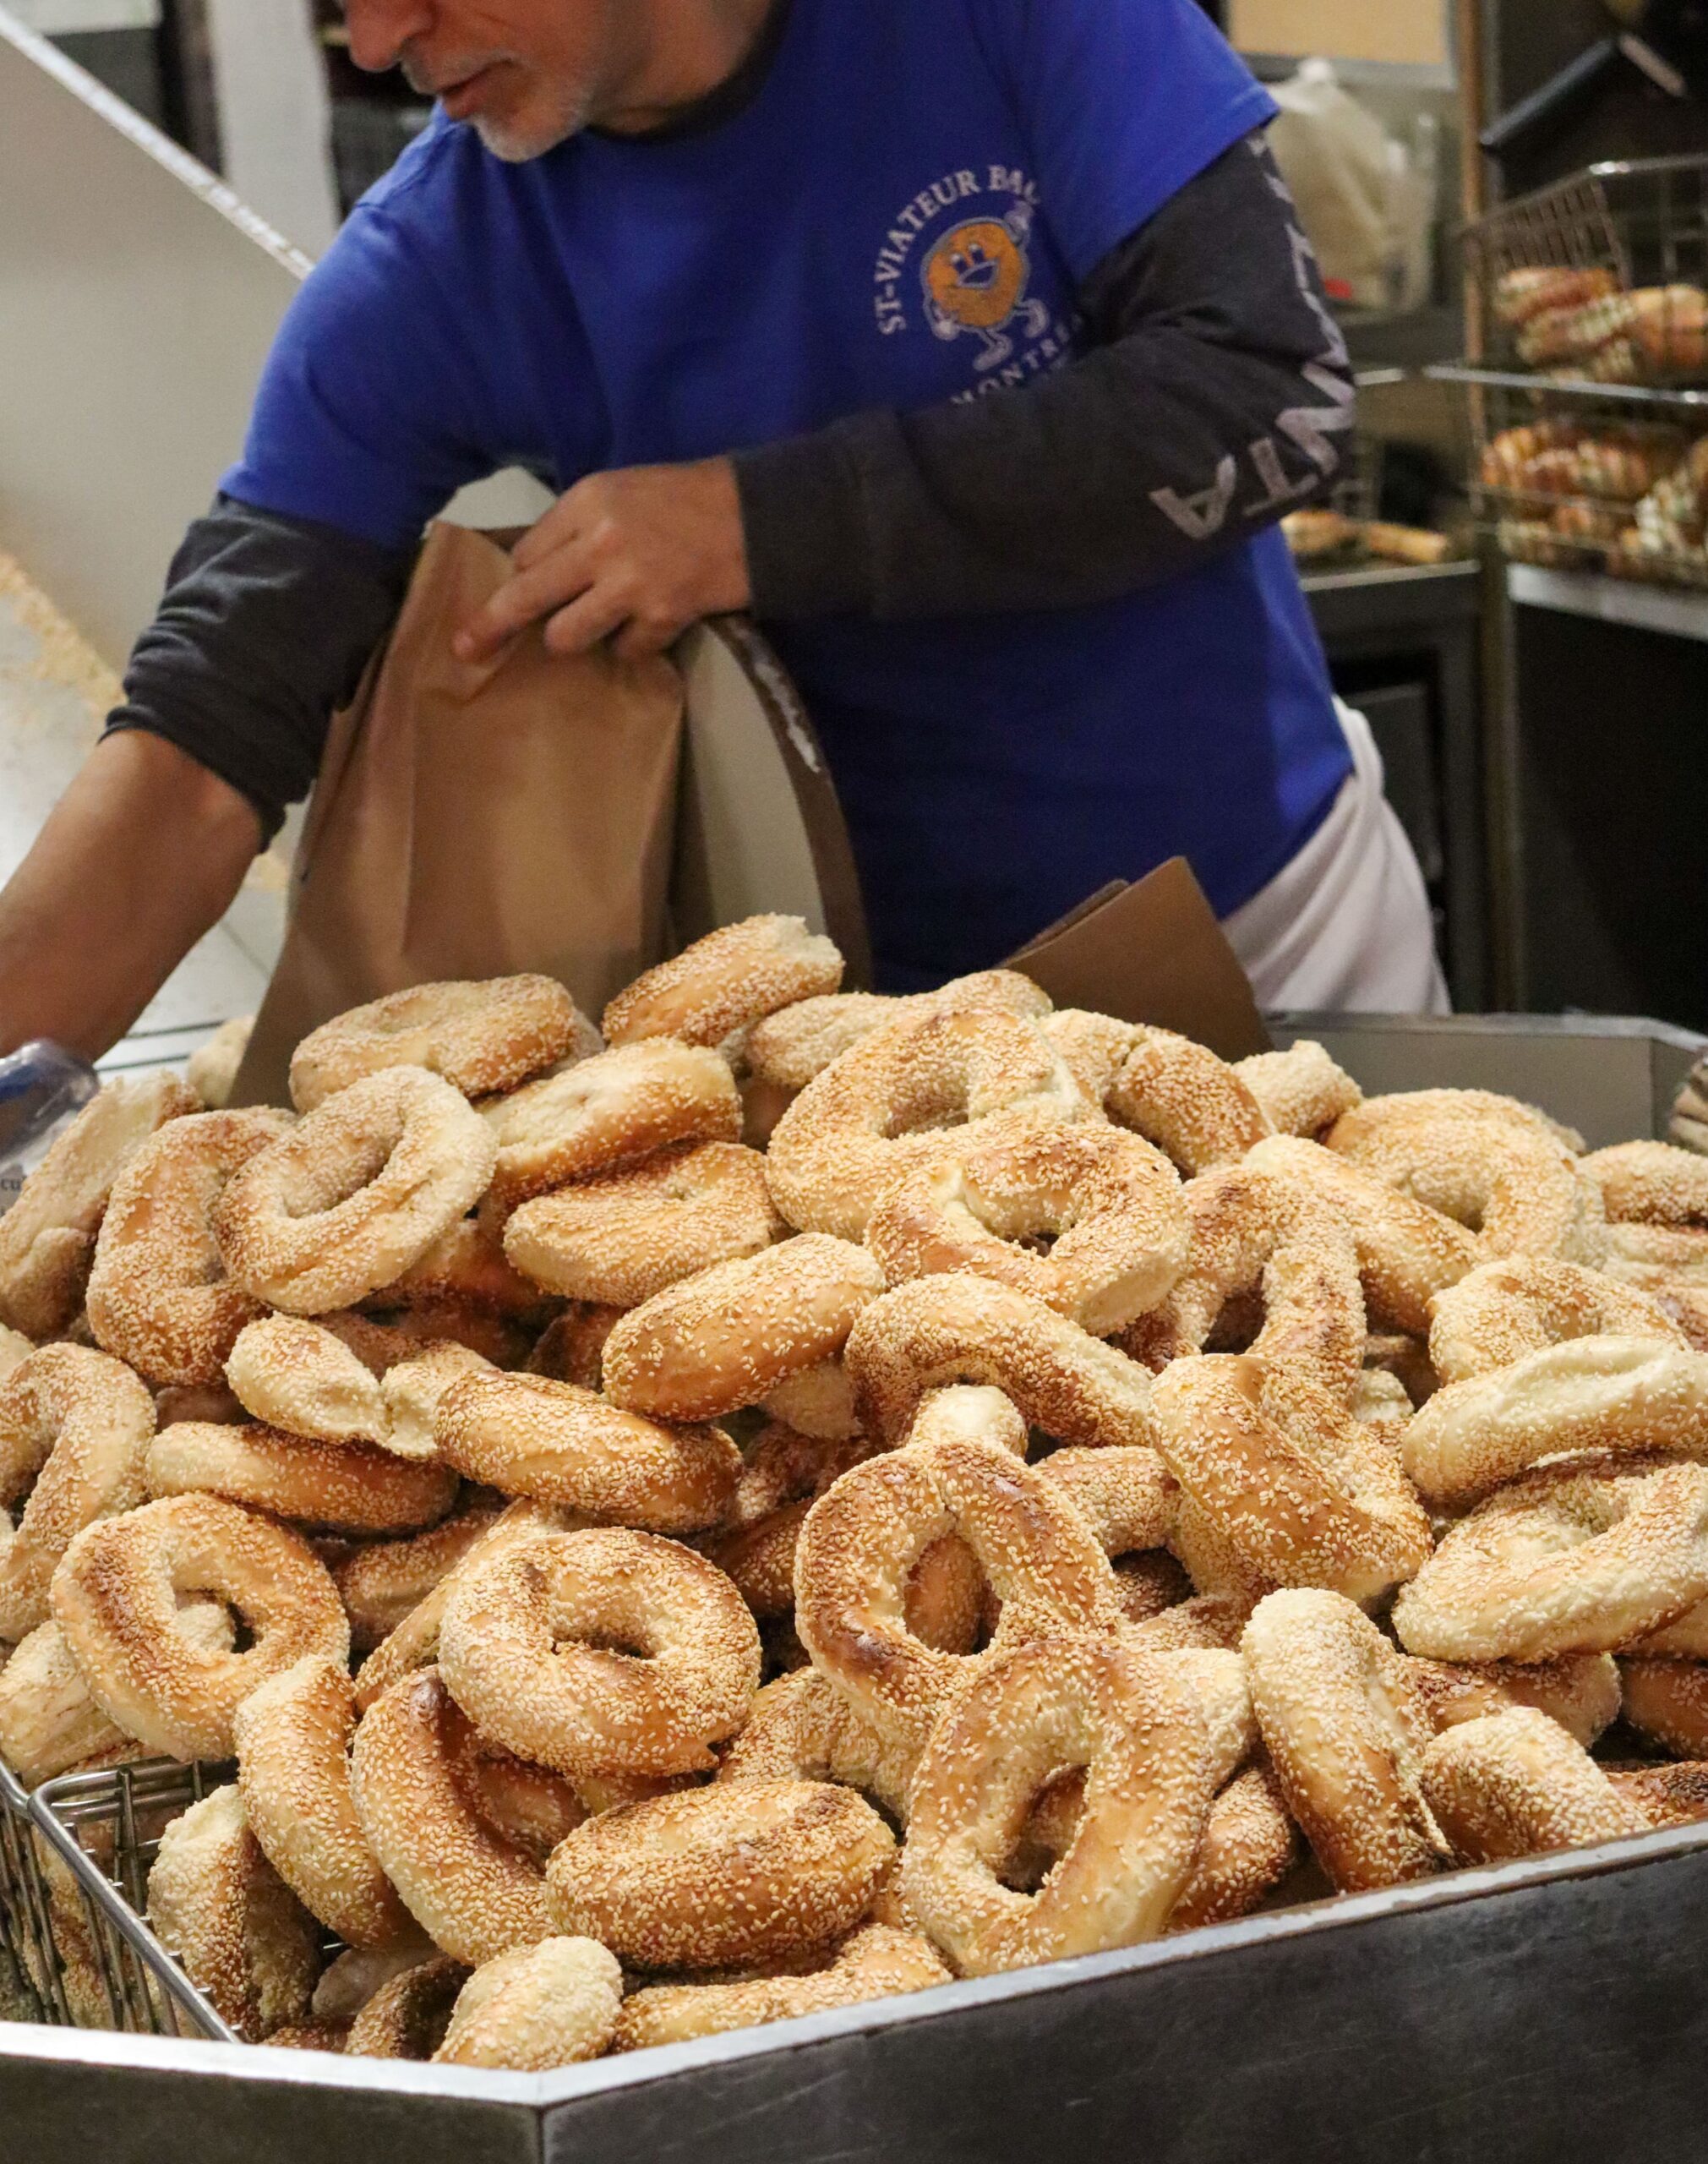 Fresh bagels from the St-Viateur bagel shop of Montreal